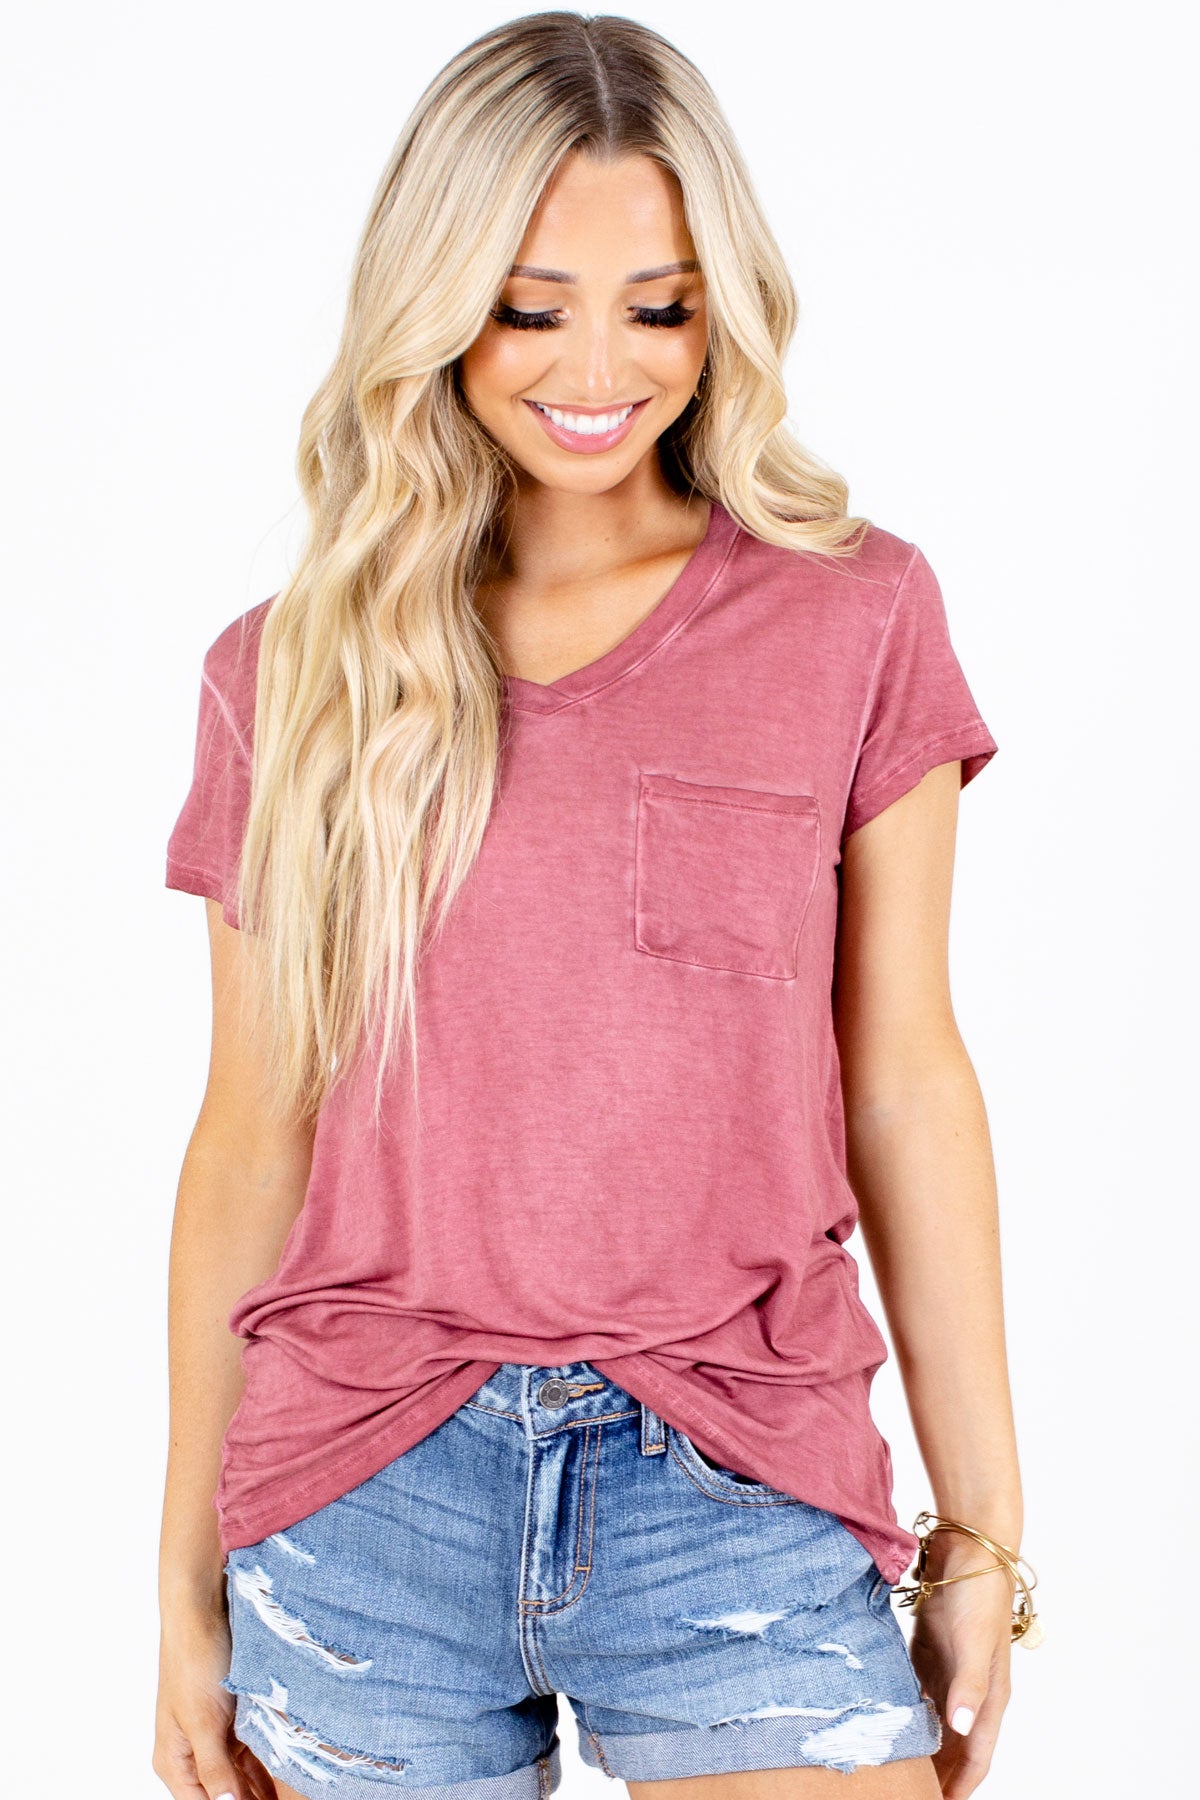 red pocket tee